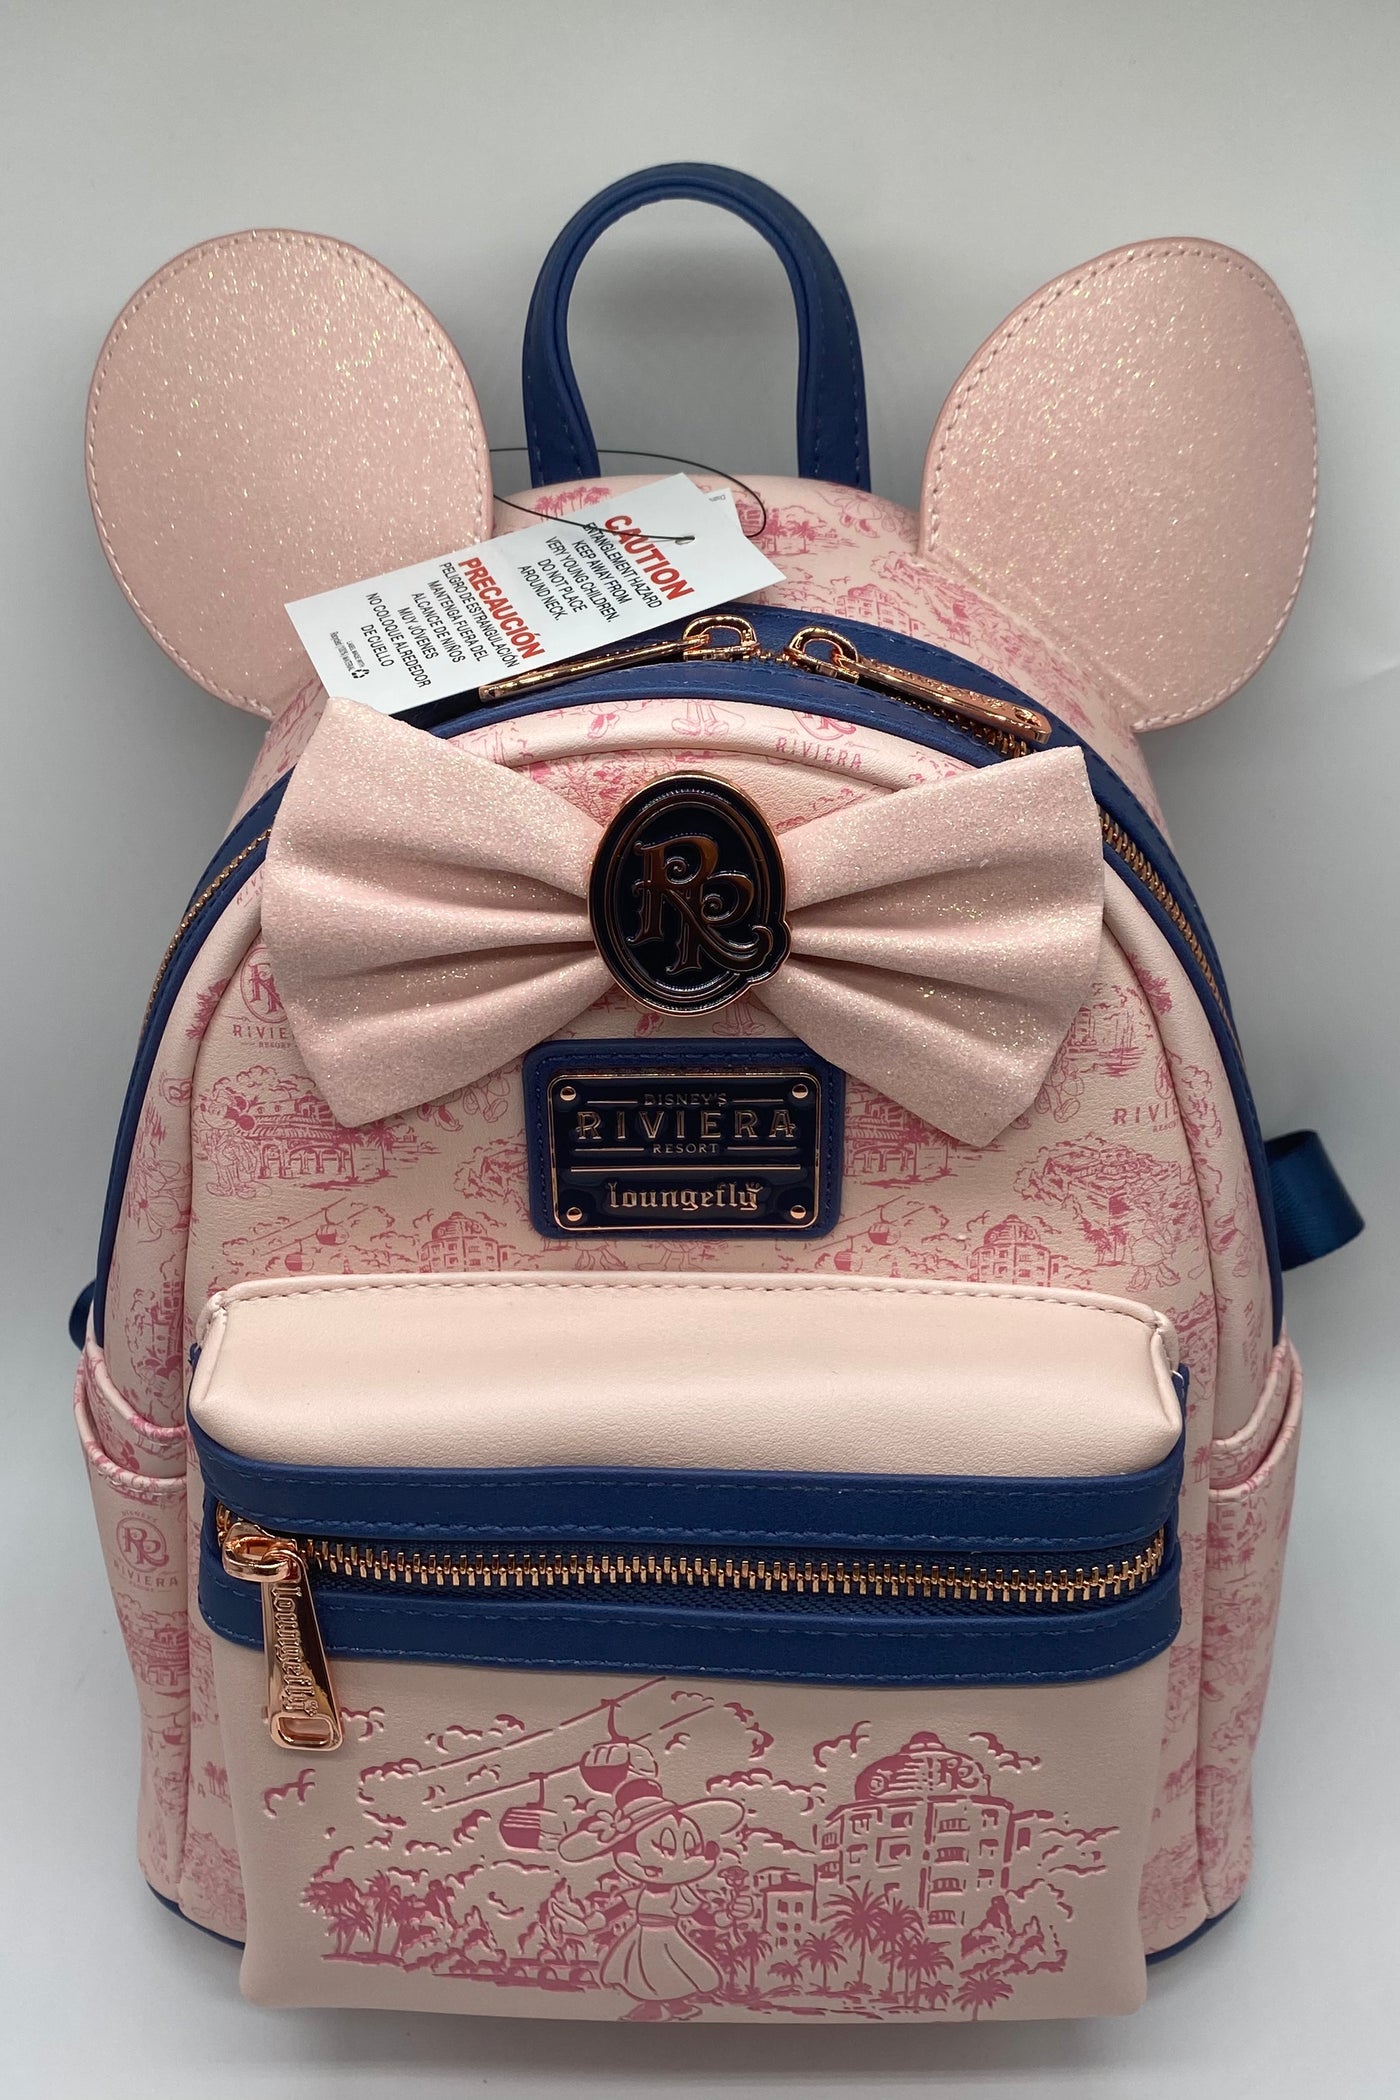 Disney Parks Riviera Resort Minnie Mini Pink Backpack Loungefly New with Tags